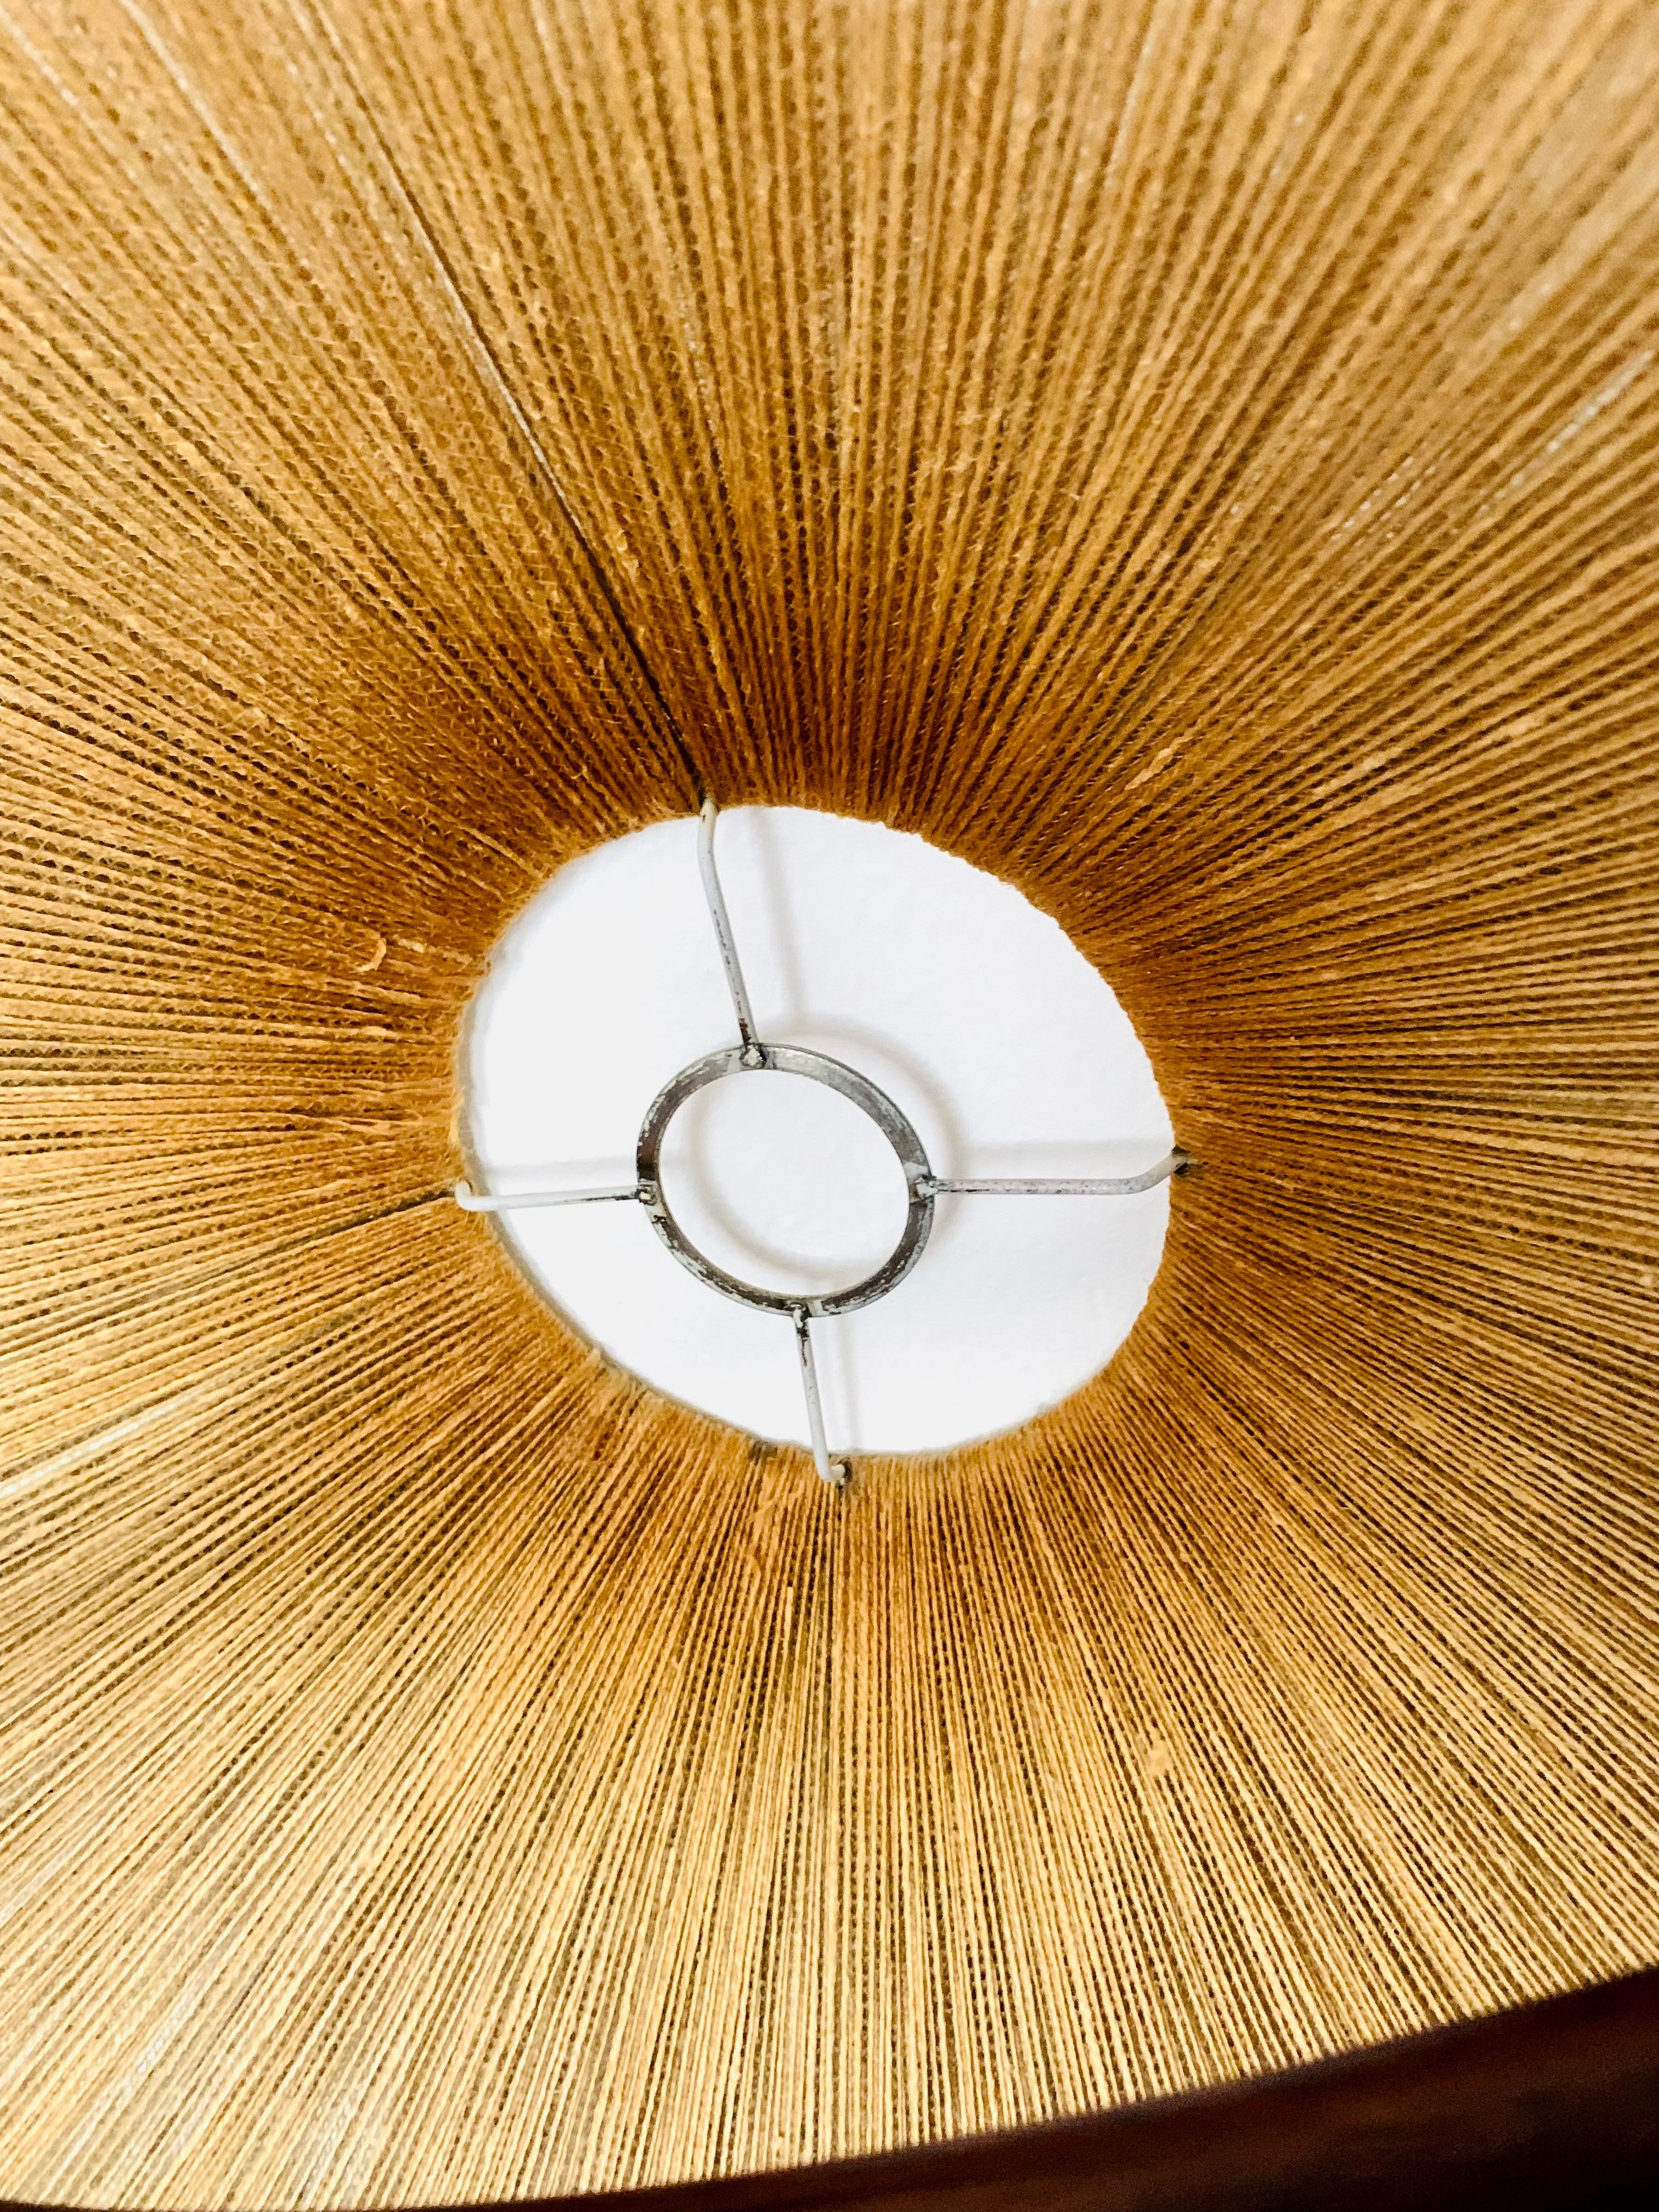 Sisal and Teak Pendant Lamp from Temde For Sale 8